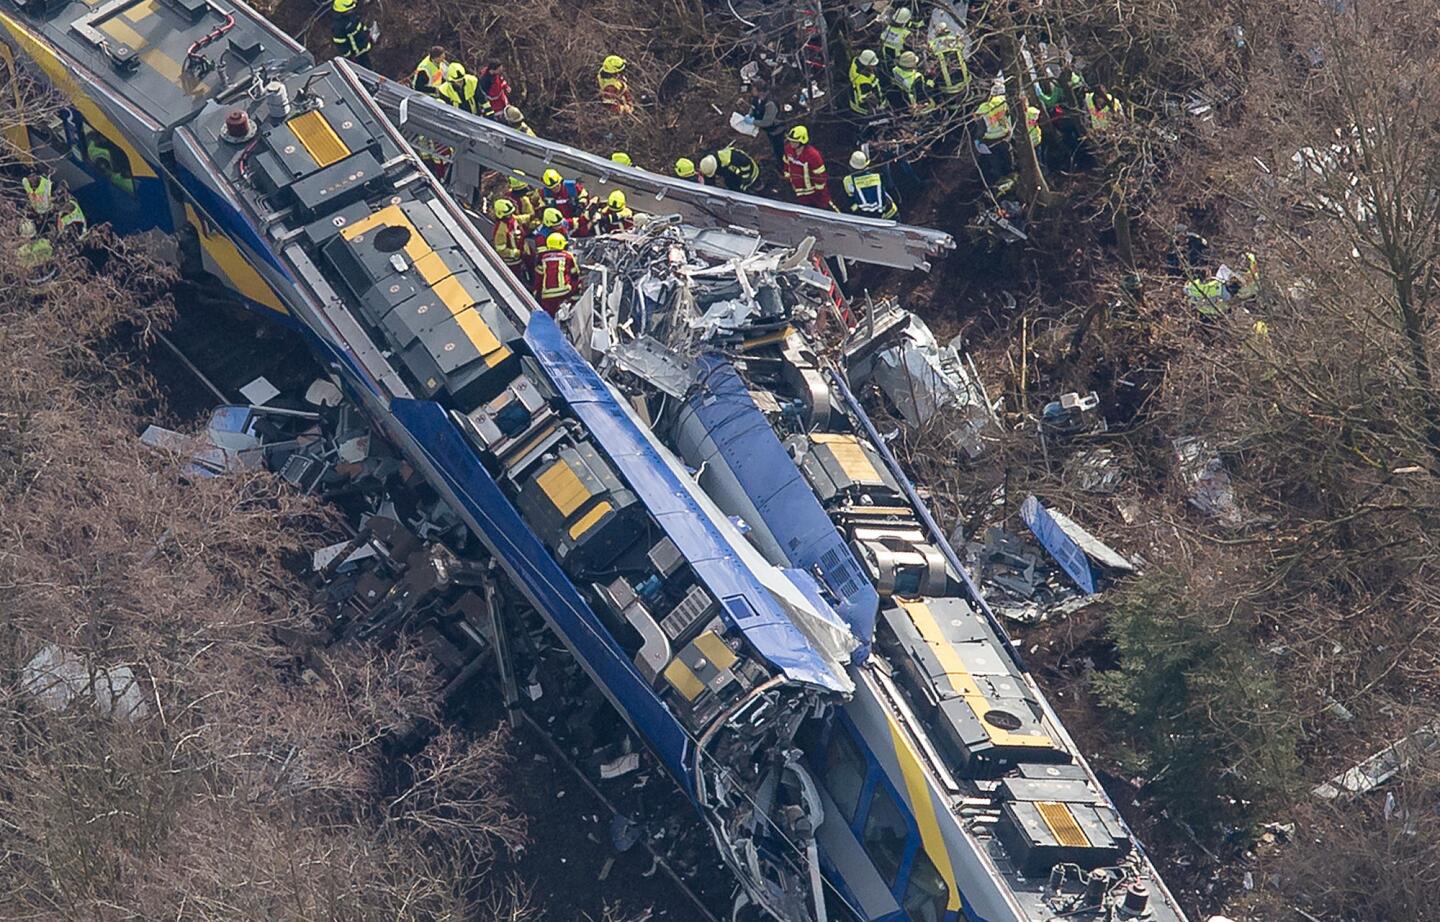 Aerial view of rescue forces working at the site of a train accident near Bad Aibling, Germany, Tuesday, Feb. 9, 2016. Several people were killed when two trains collided head-on.